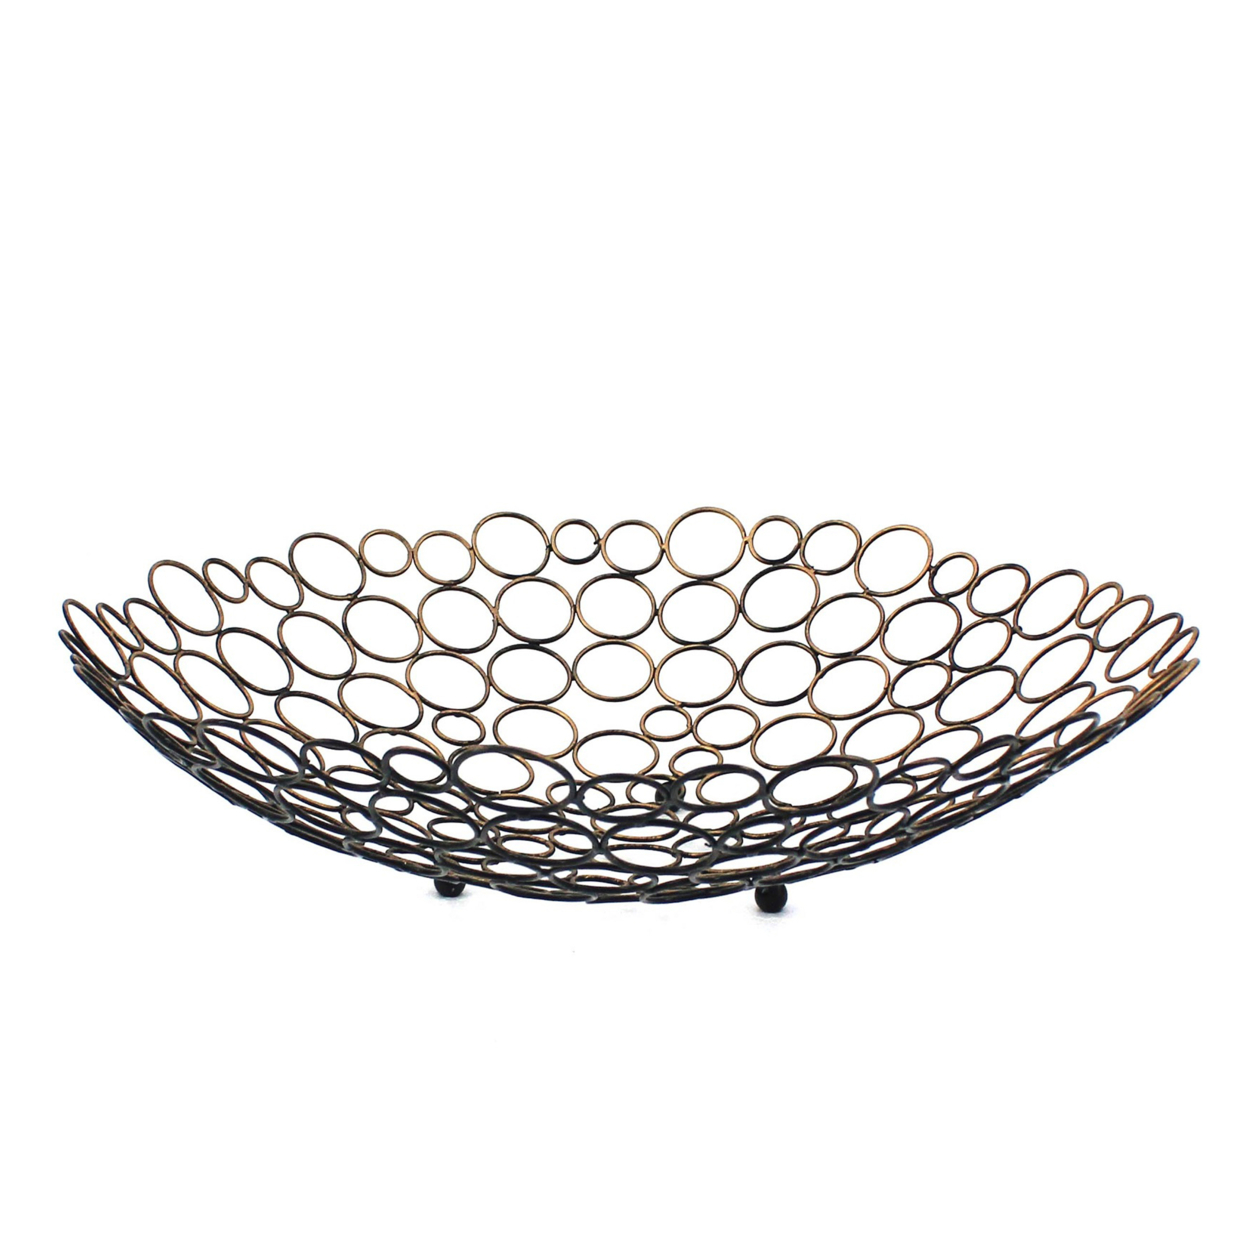 Decorative Metal Tray With Mesh Design And Ball Support,Gold And Black- Saltoro Sherpi